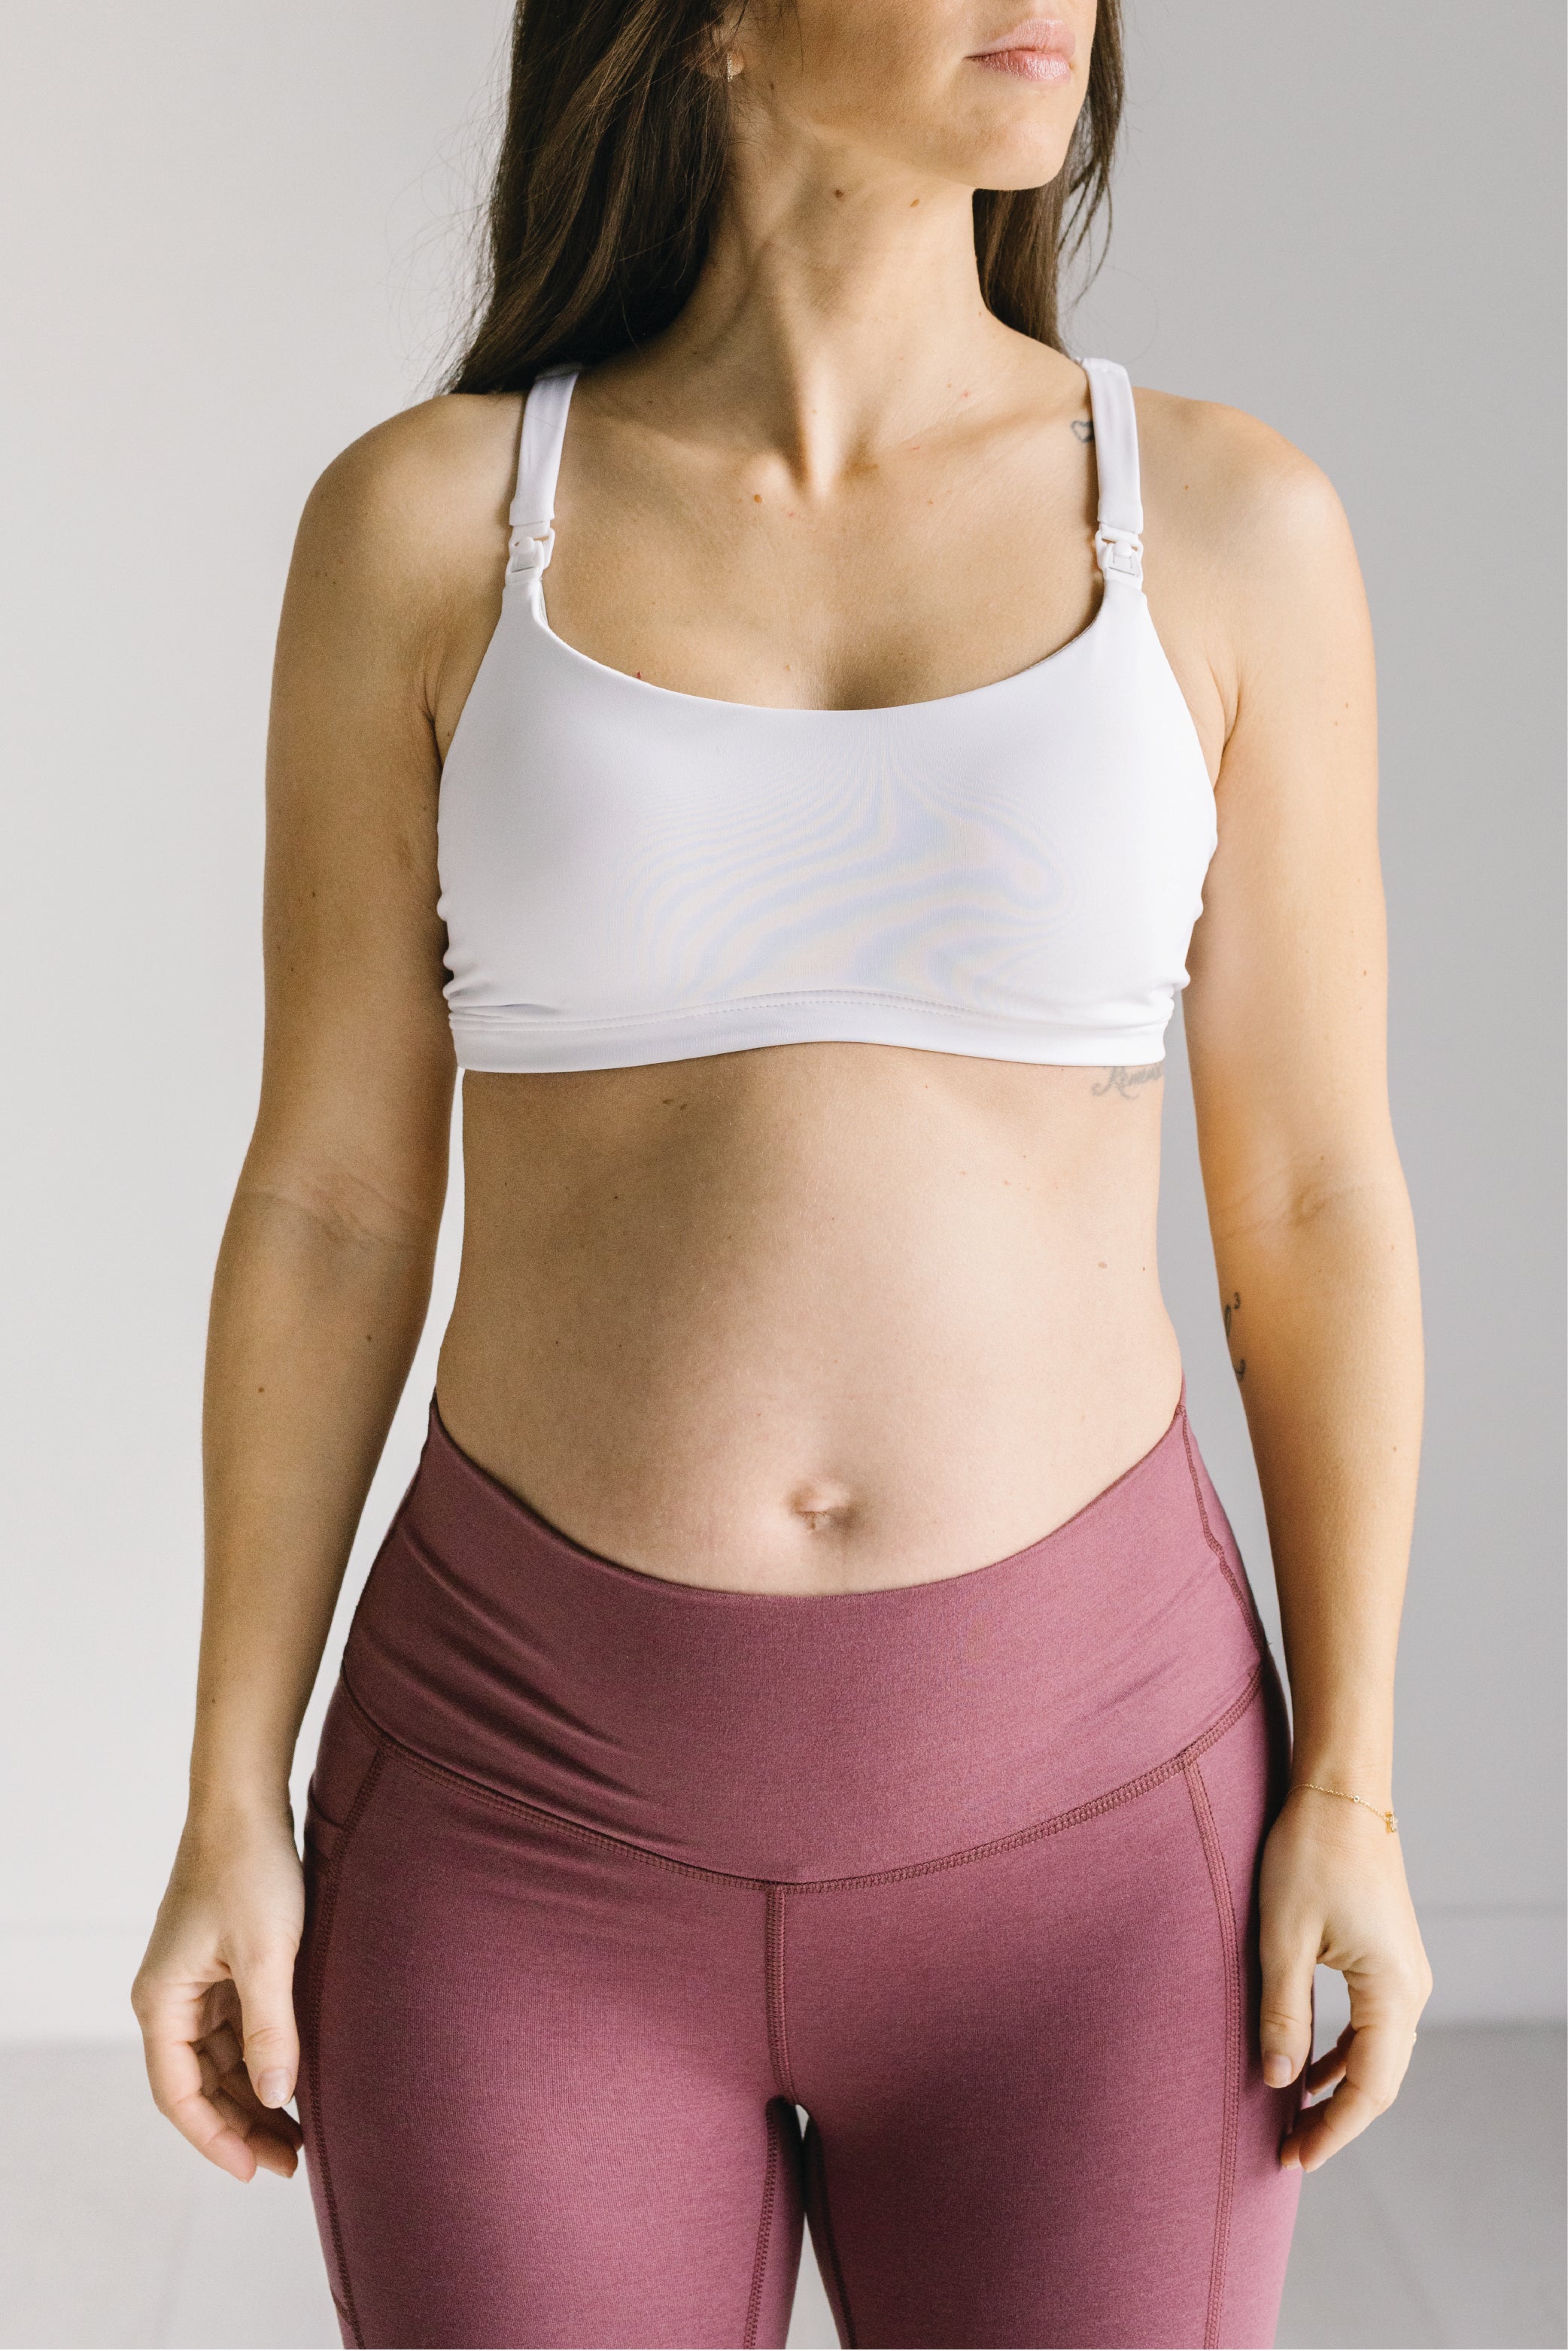 Maternity Bras Designed for Comfort and Support – Anook Athletics